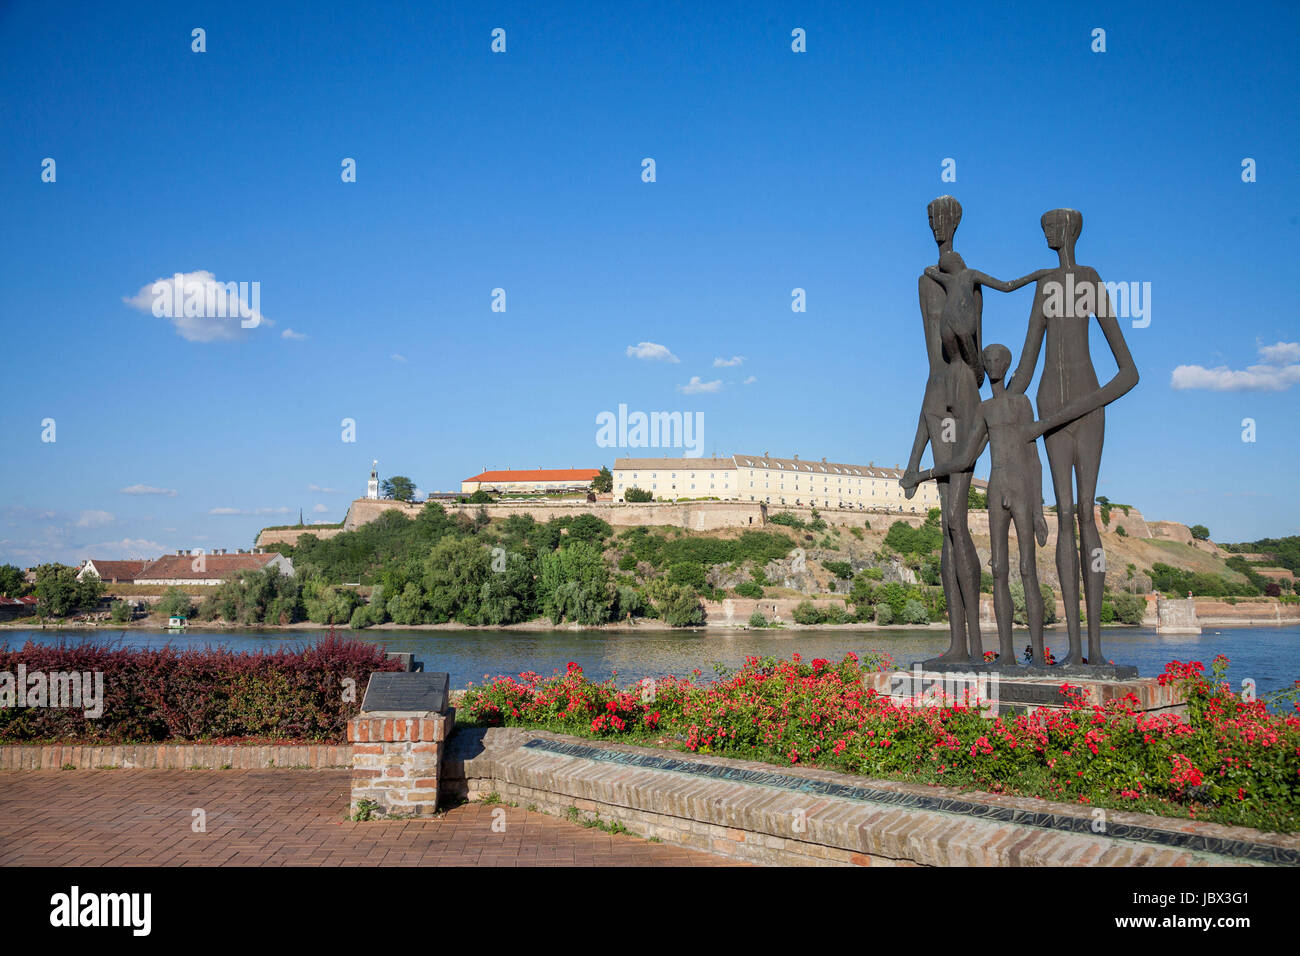 NOVI SAD, SERBIA - JUNE 11, 2017: Monument dedicated to the victims of the Shoah in Serbia in front of the Petrovaradin Fortress, one of the main land Stock Photo